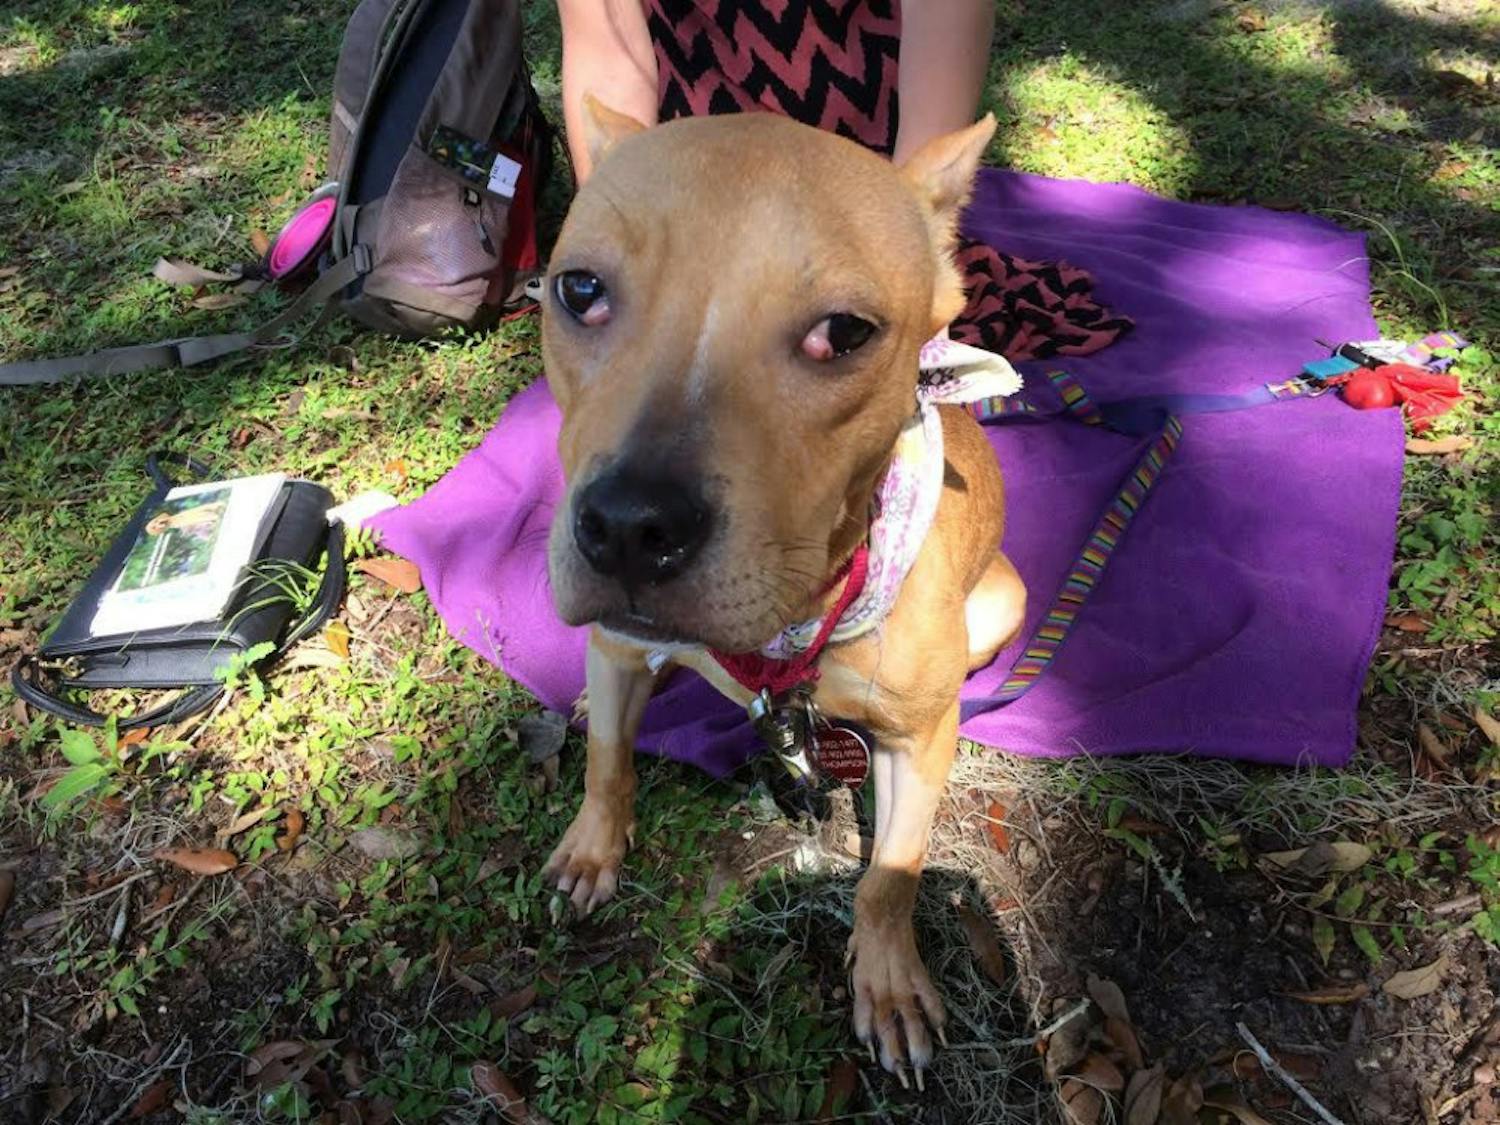 Sunflower, a tan pit bull, will undergo surgery next month for a heart condition. A YouCaring page has fundraised $2,157 for her surgery, as of press time.
&nbsp;